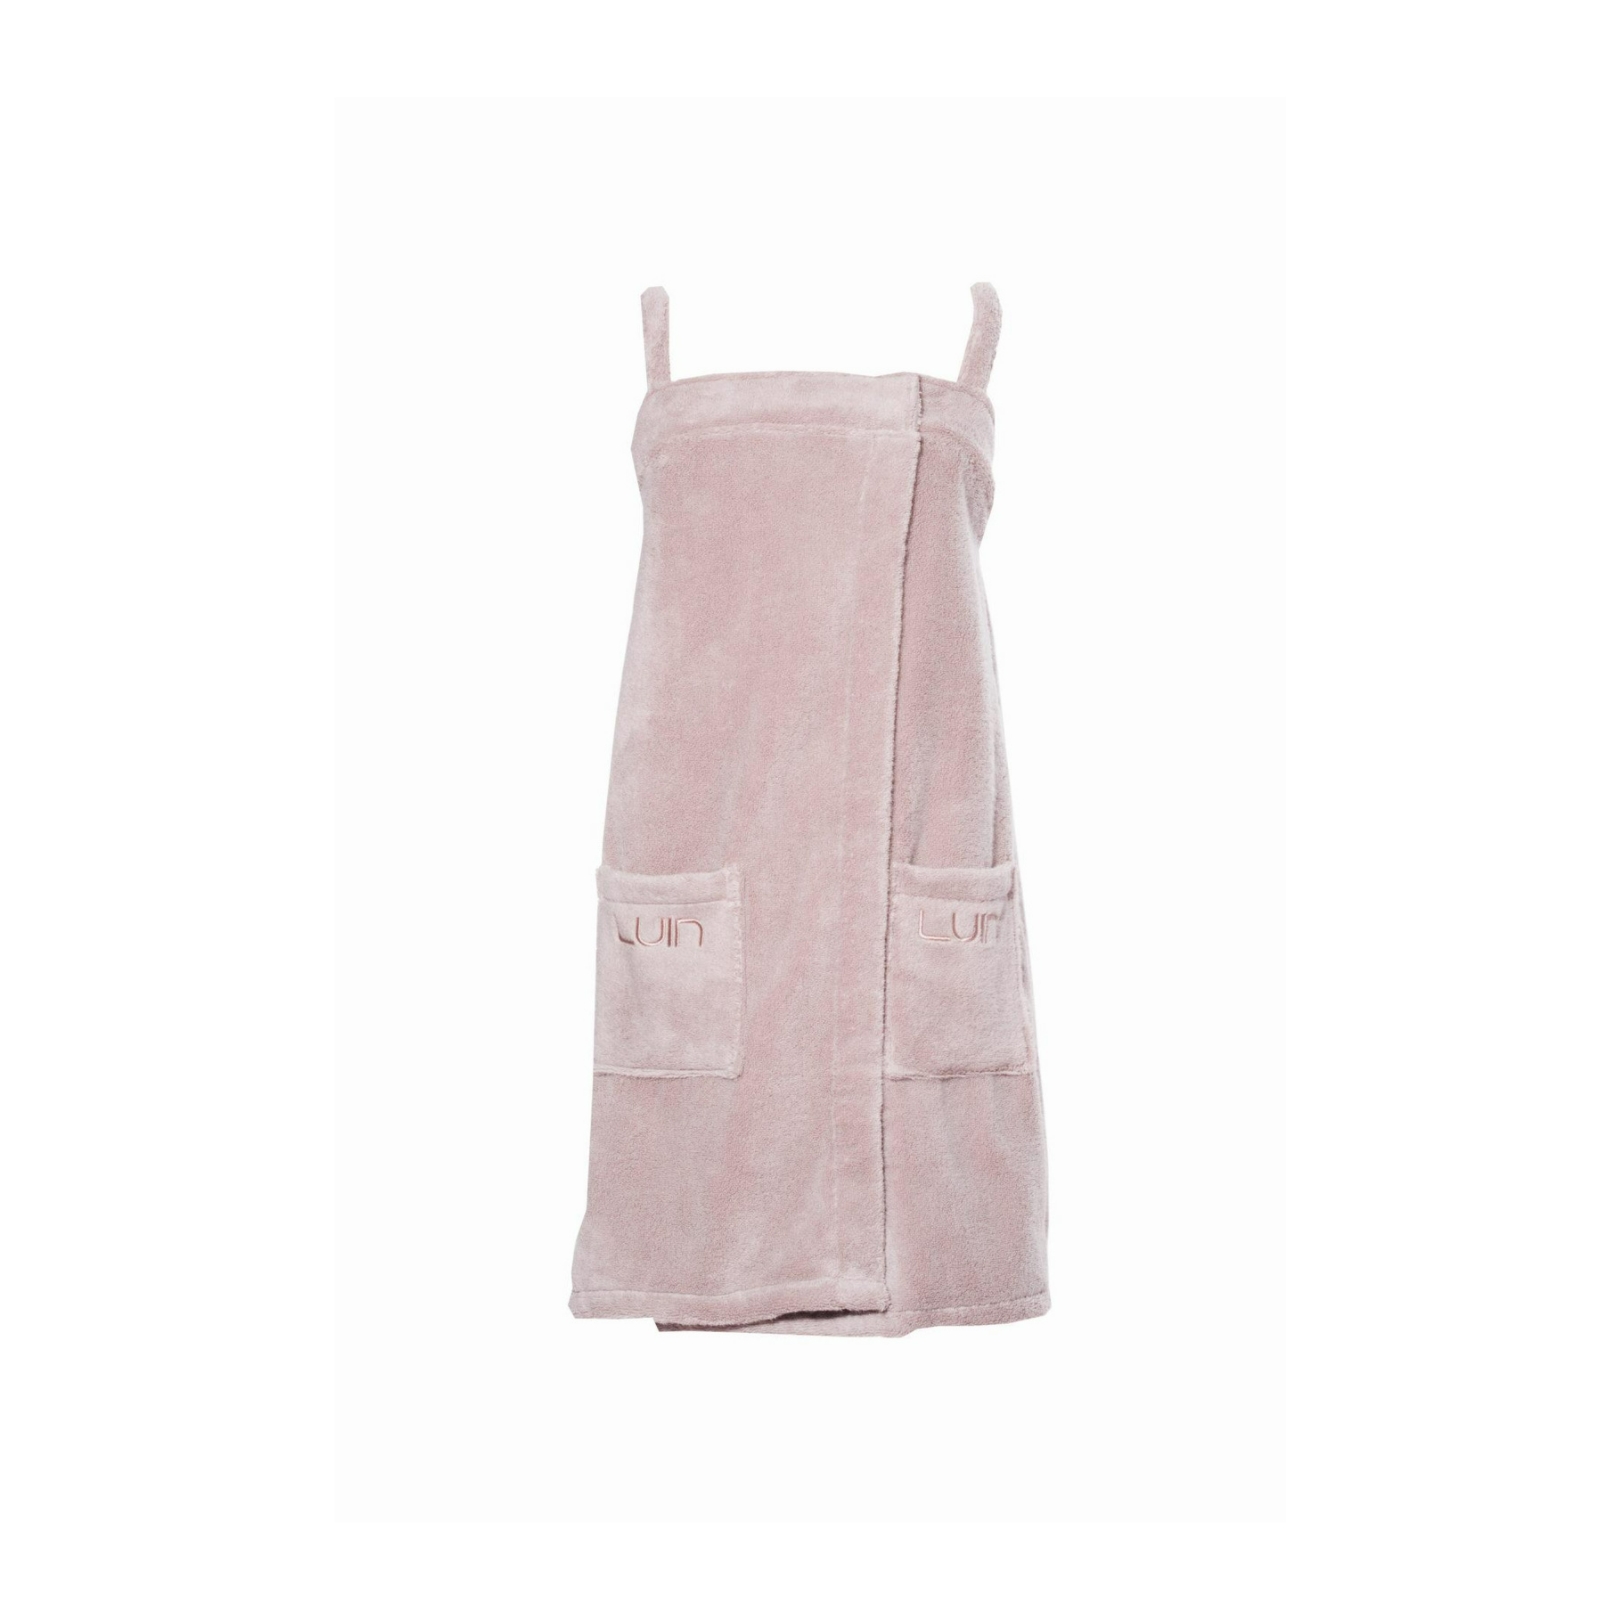 Spa dress L/XL dusty rose Luin Living Your Home Your Spa